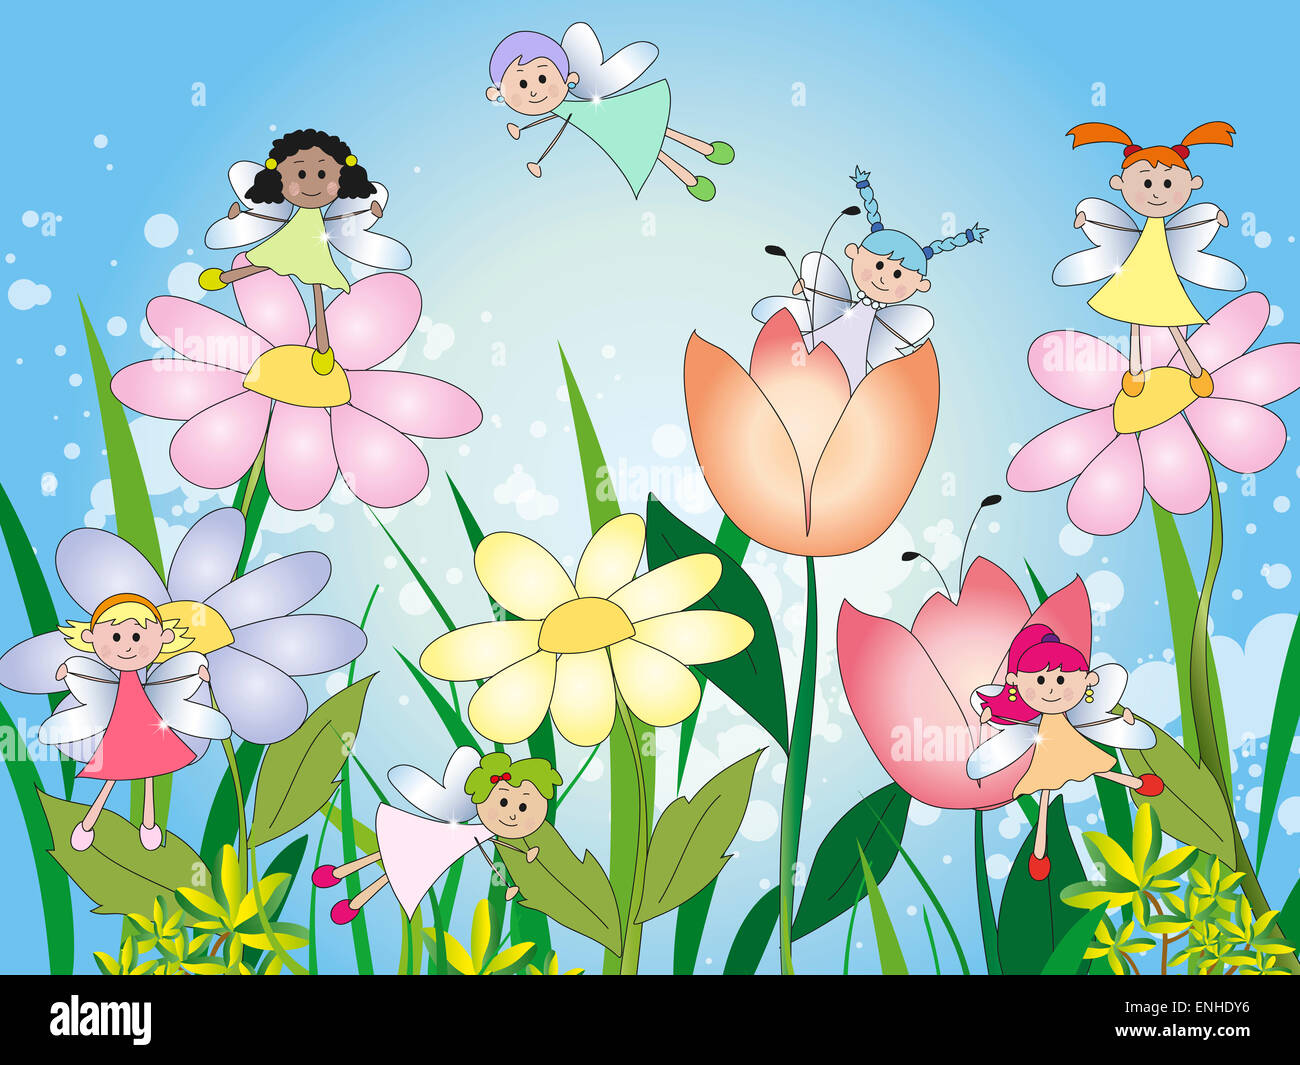 Illustration Of Fairies In The Flowers Stock Photo Alamy